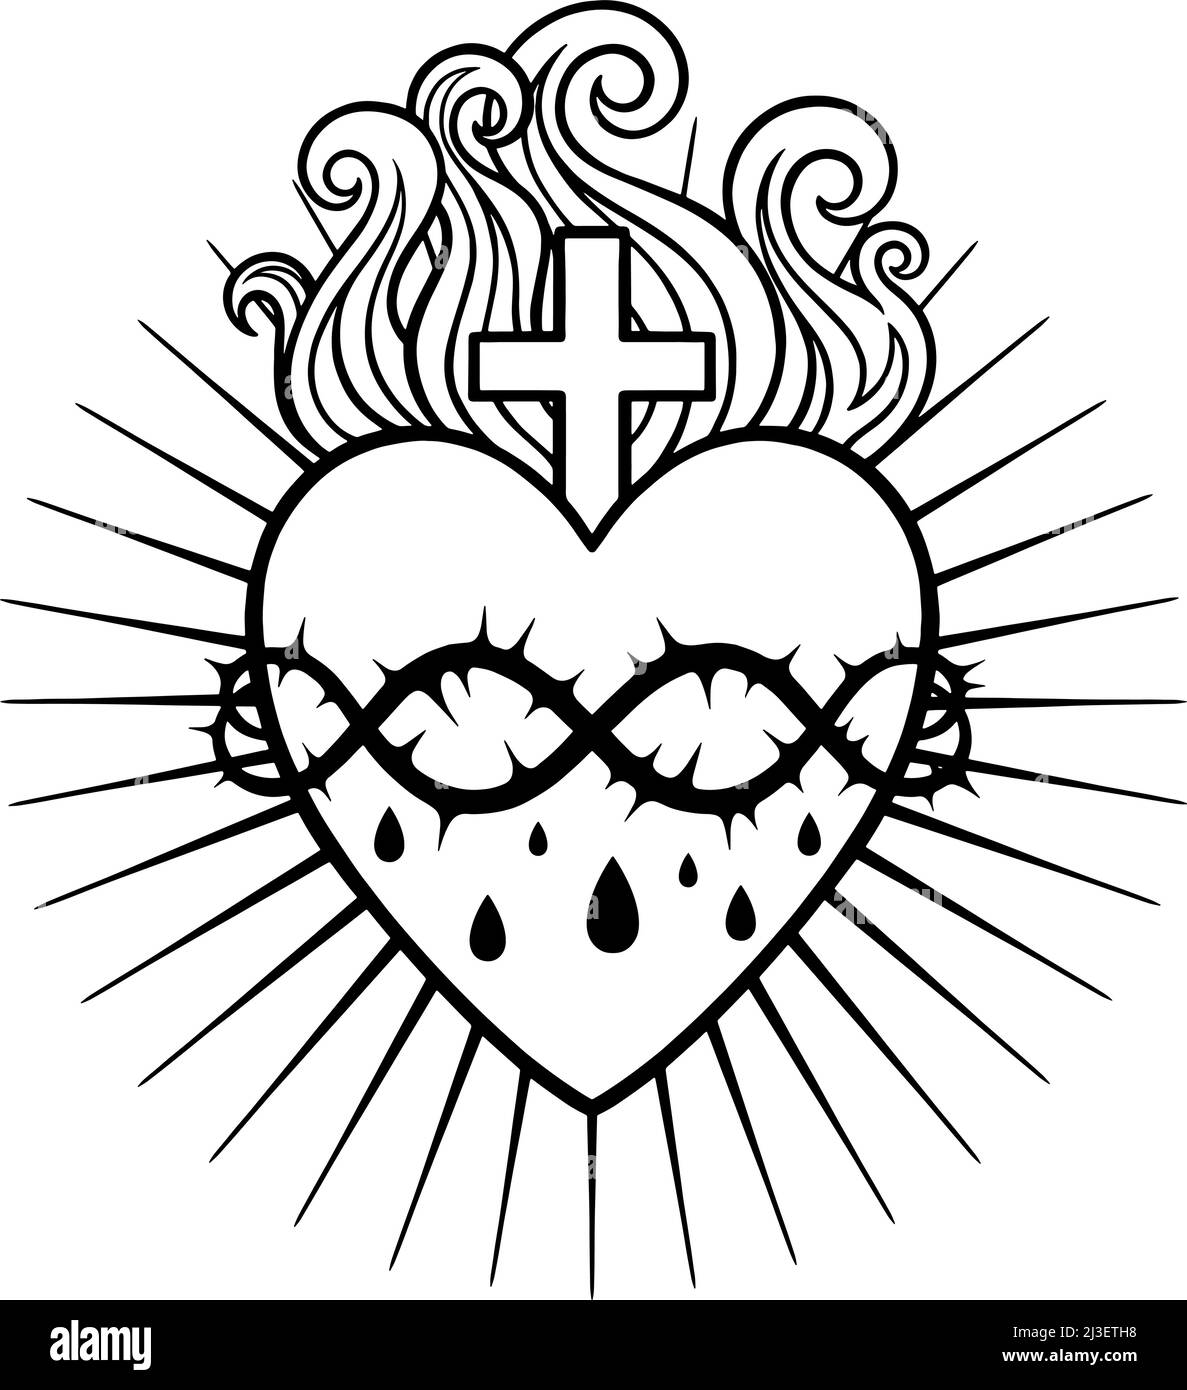 Sacred Heart of Jesus Vector Images (over 510)